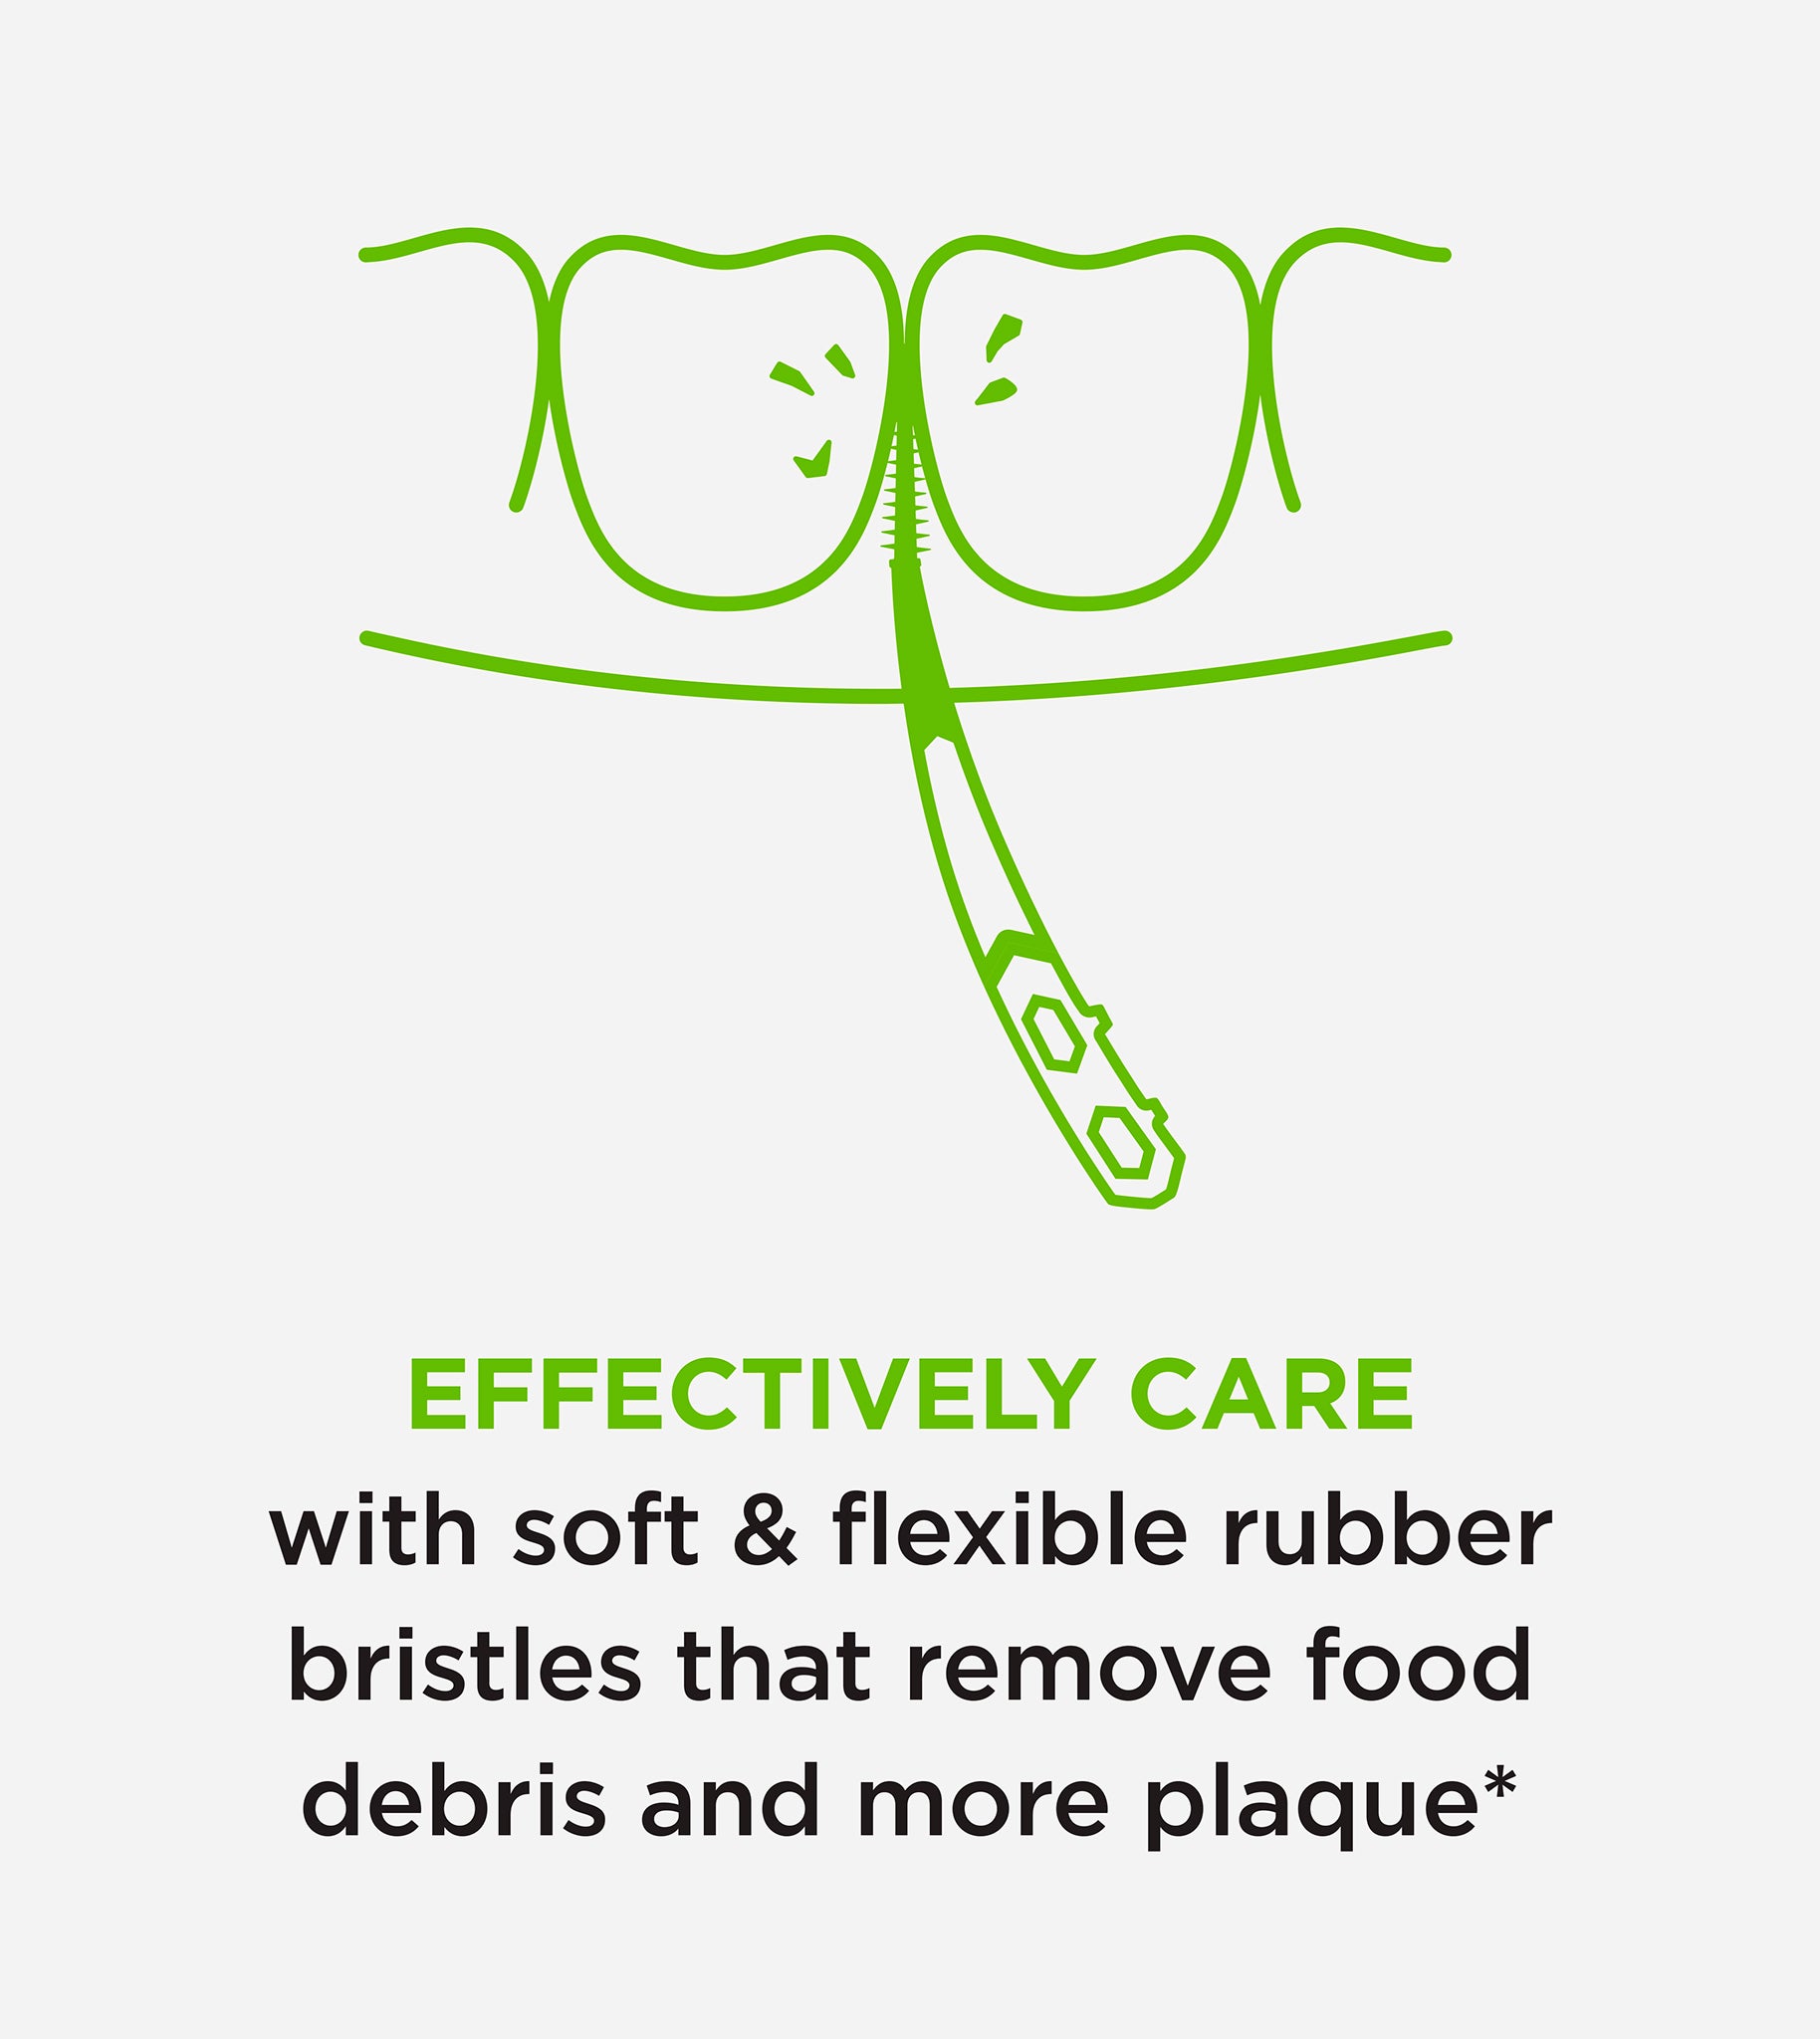 Effectively care with soft and flexible rubber bristles that remove food debris and more plaque.